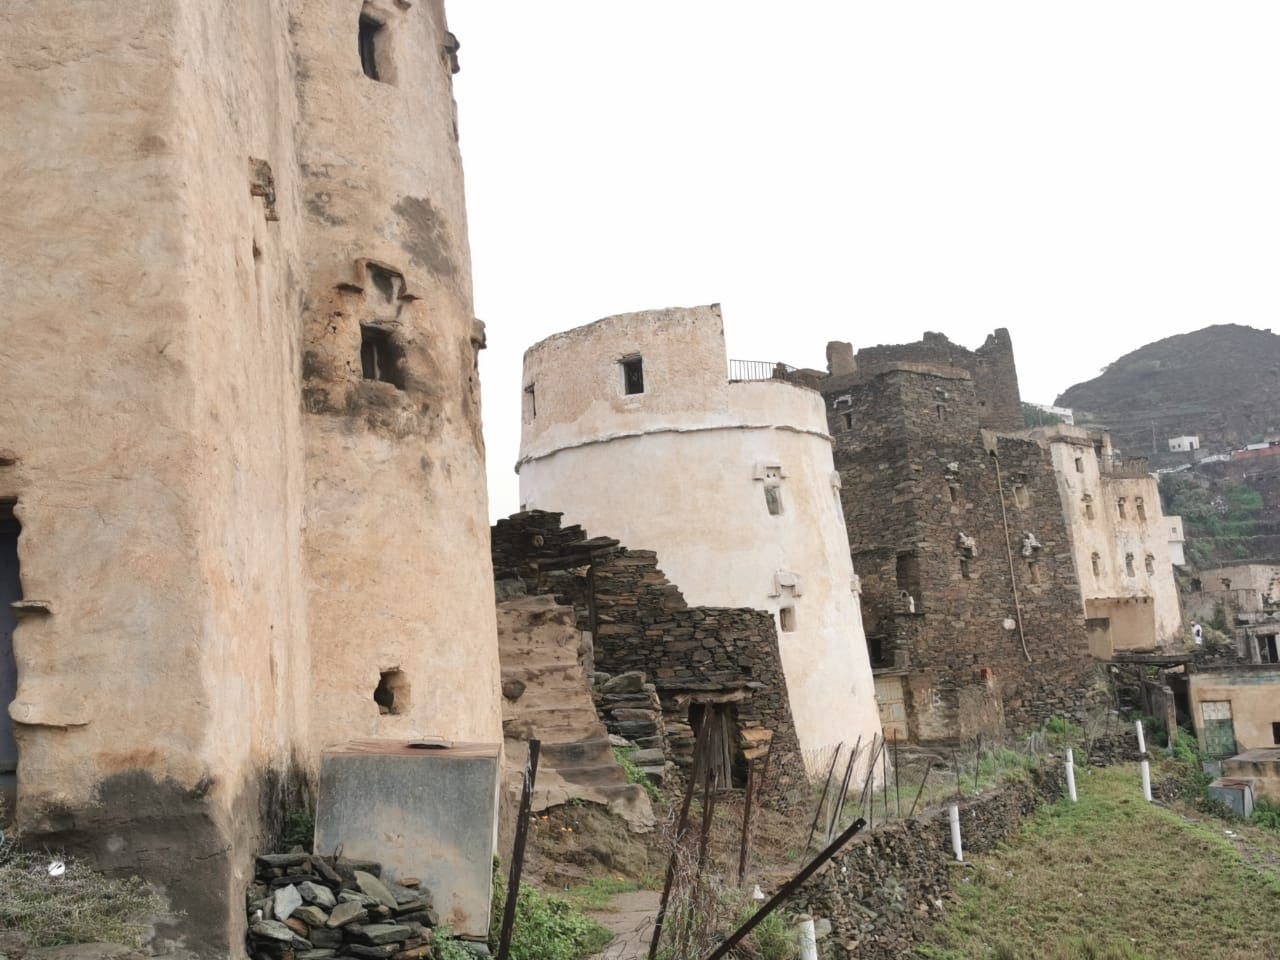 Building engineering in the castles of Al-Dayer Governorate